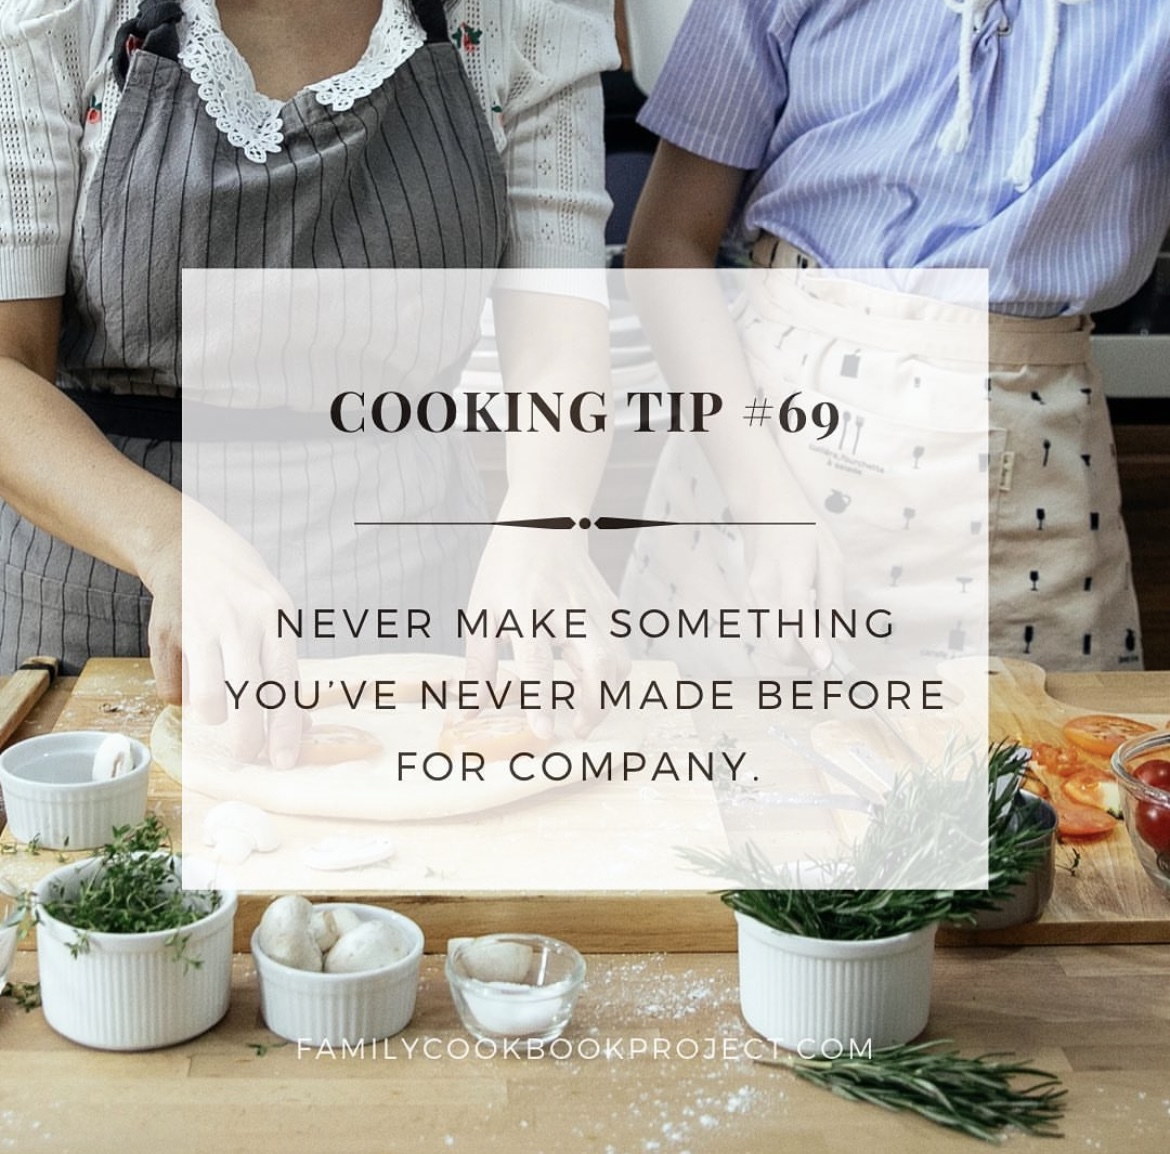 Here's another tip from Family Cookbook Project - Create your own printed cookbook full of your favorite family recipes at familycookbookproject.com/getstarted.asp today!   #familycookbookproject #familycookbook #cookbook #cooking #homecooking #food #foodie #recipes #cookingathome #cookingtips